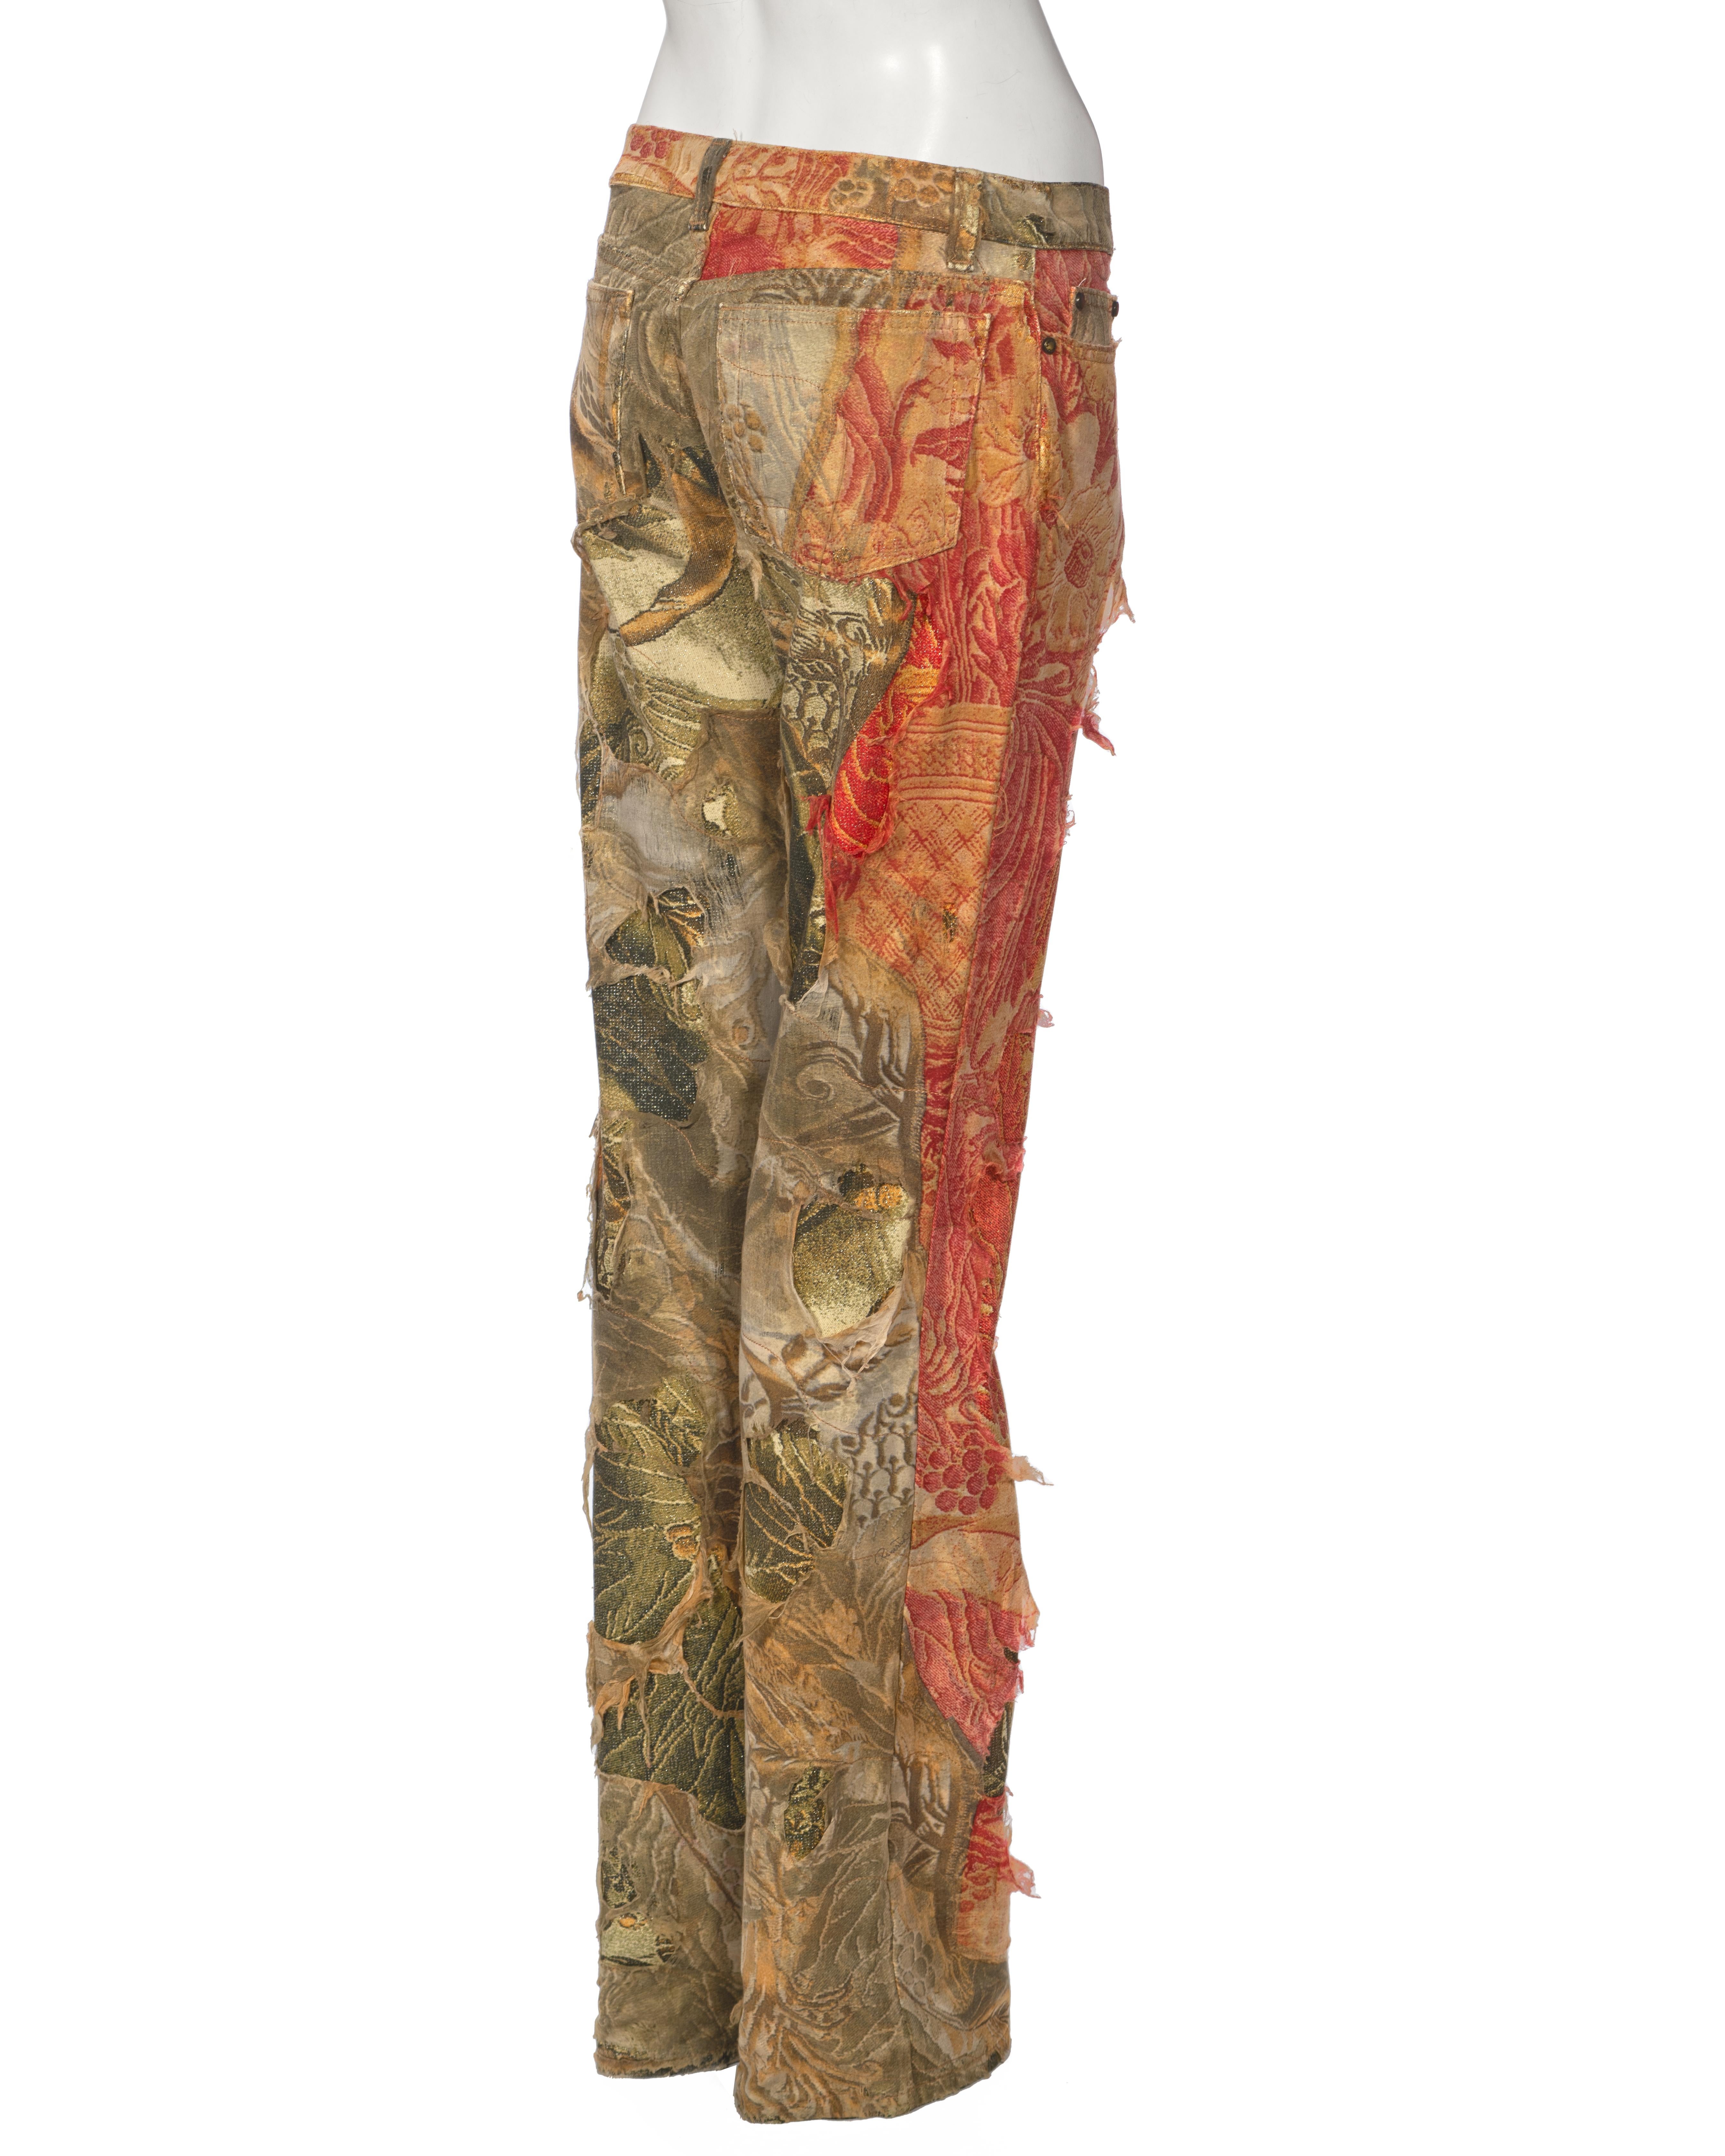 Roberto Cavalli Baroque Cotton Pants With Distressed Silk Overlay, fw 2001 For Sale 2